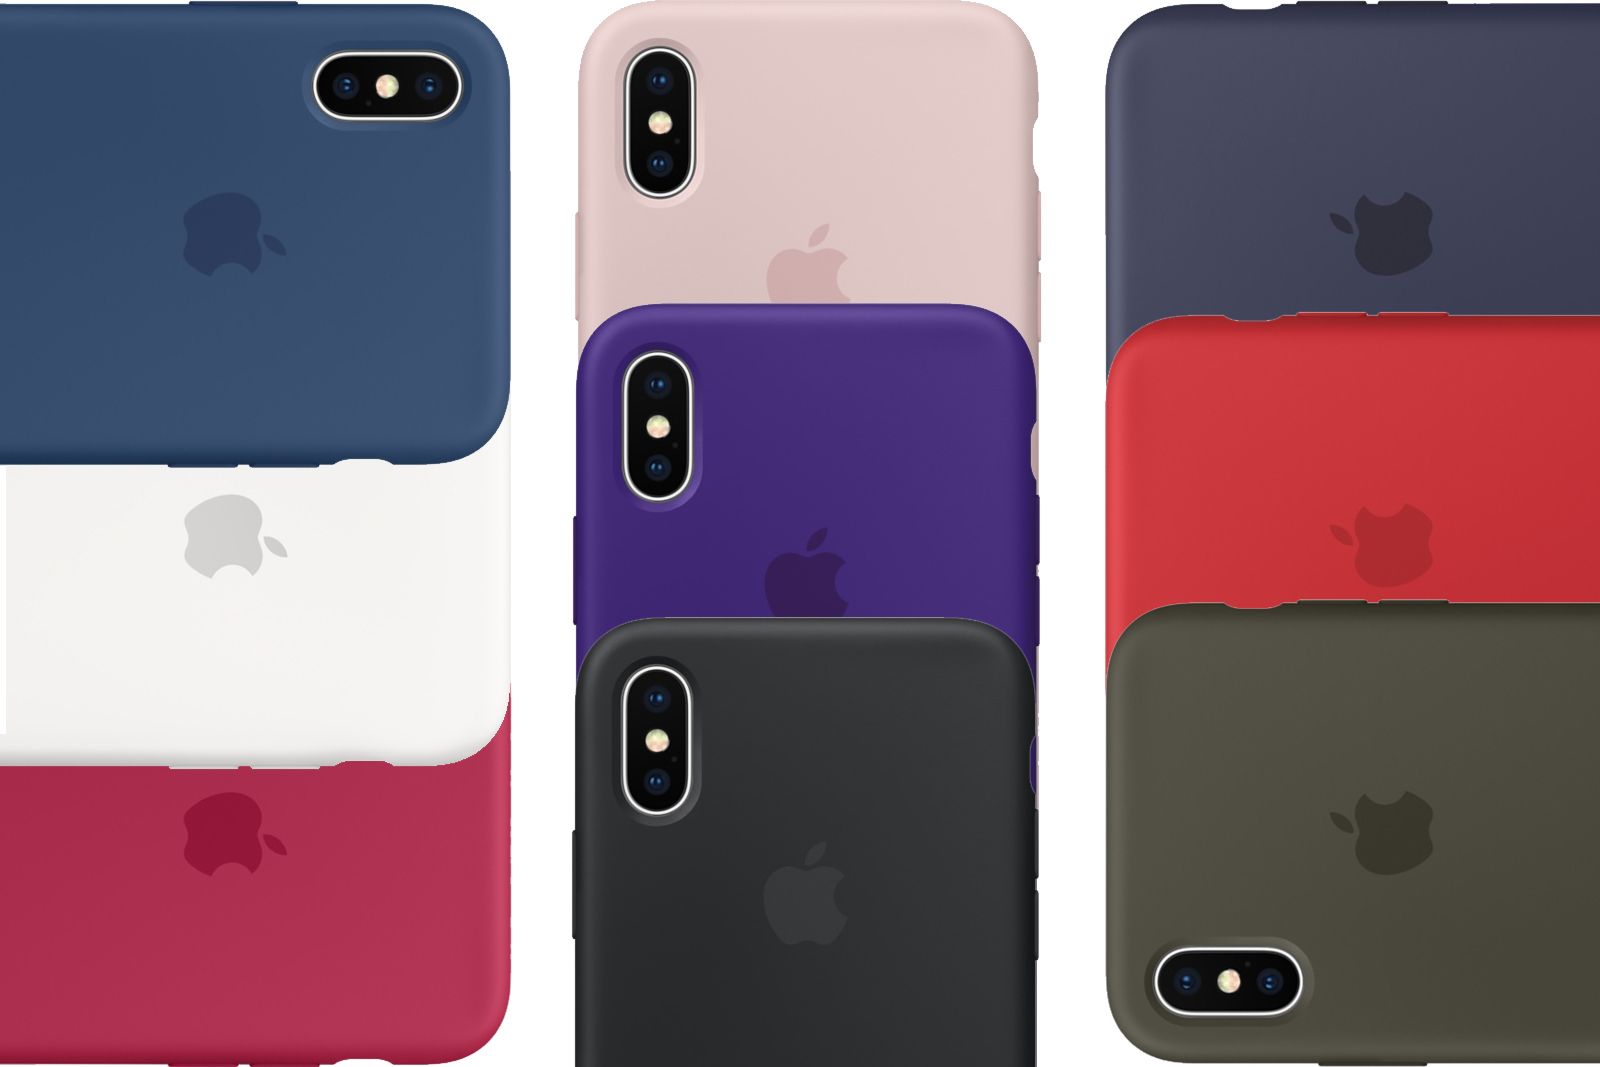 Best Iphone X Cases Protect Your New Apple Device image 1